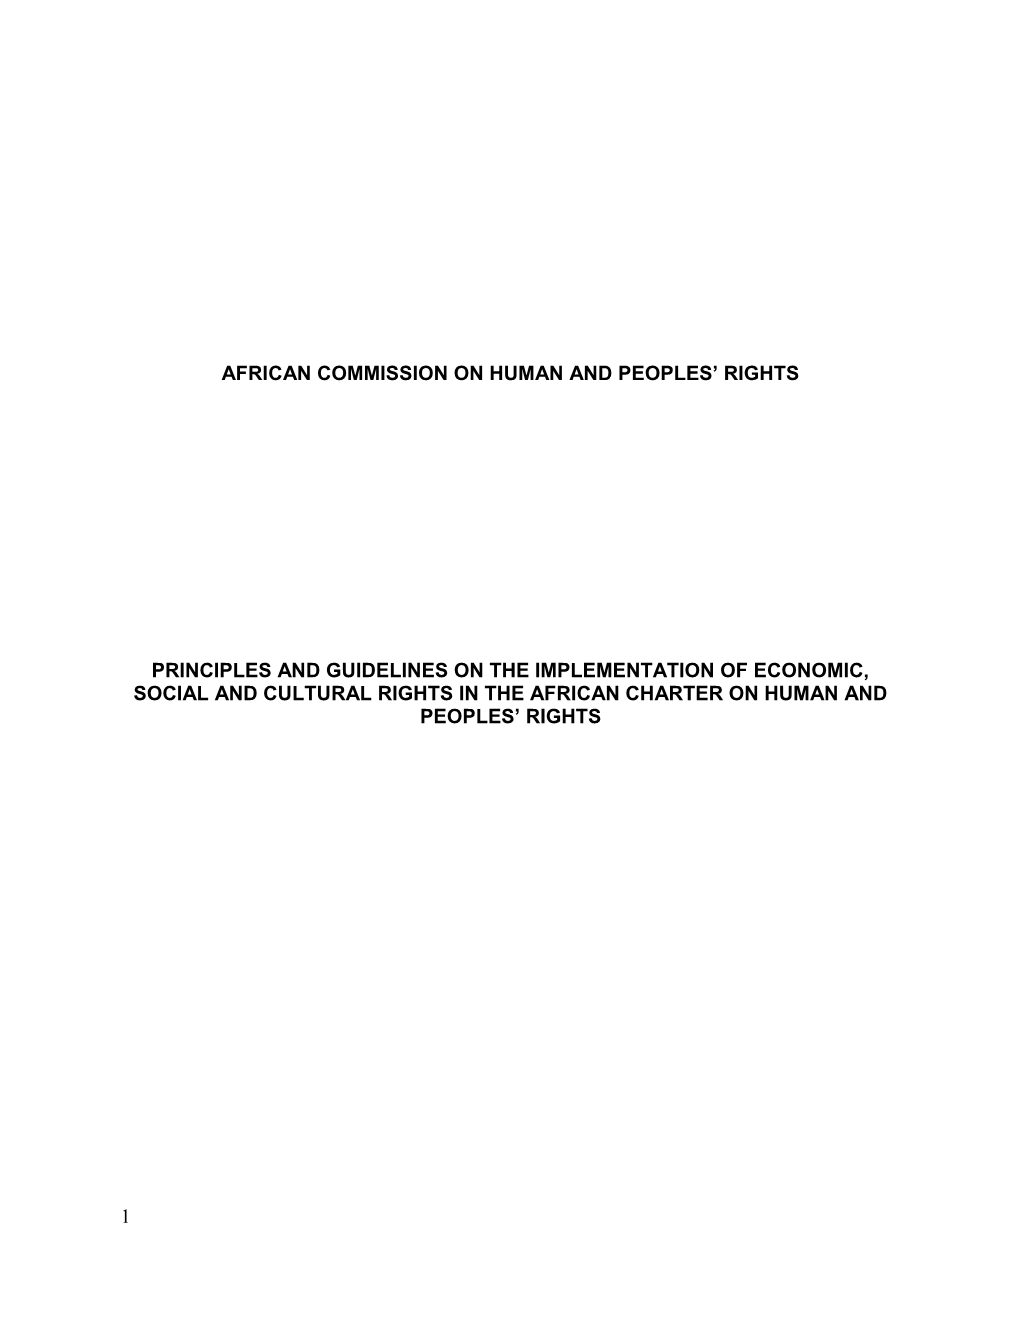 African Charter on Human and Peoples’ Rights